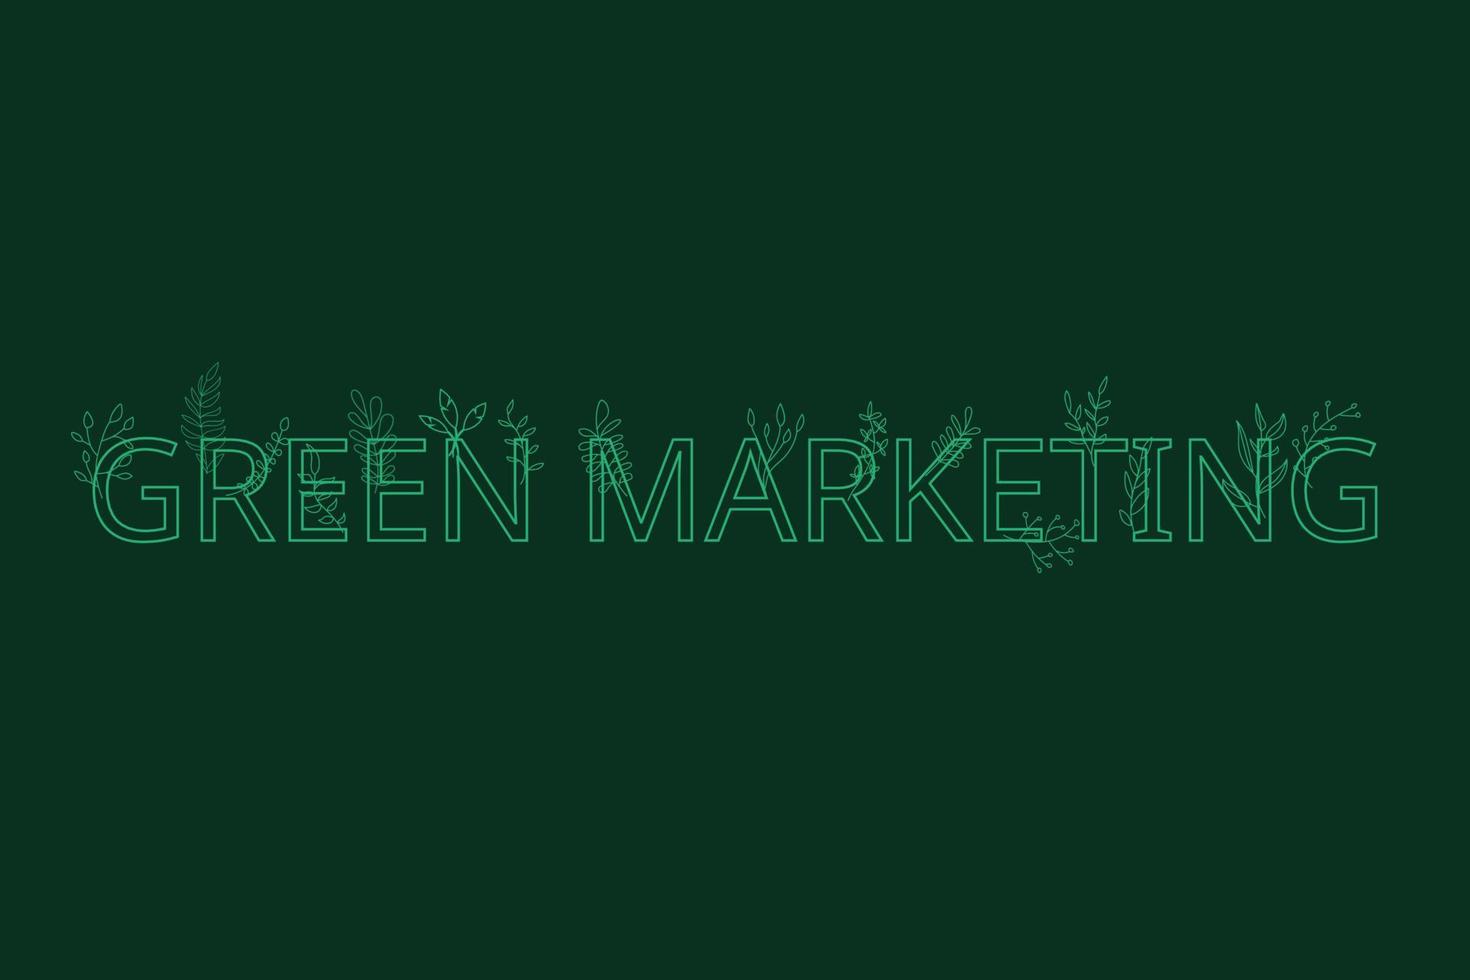 Green marketing is the marketing of environmentally friendly products and services vector